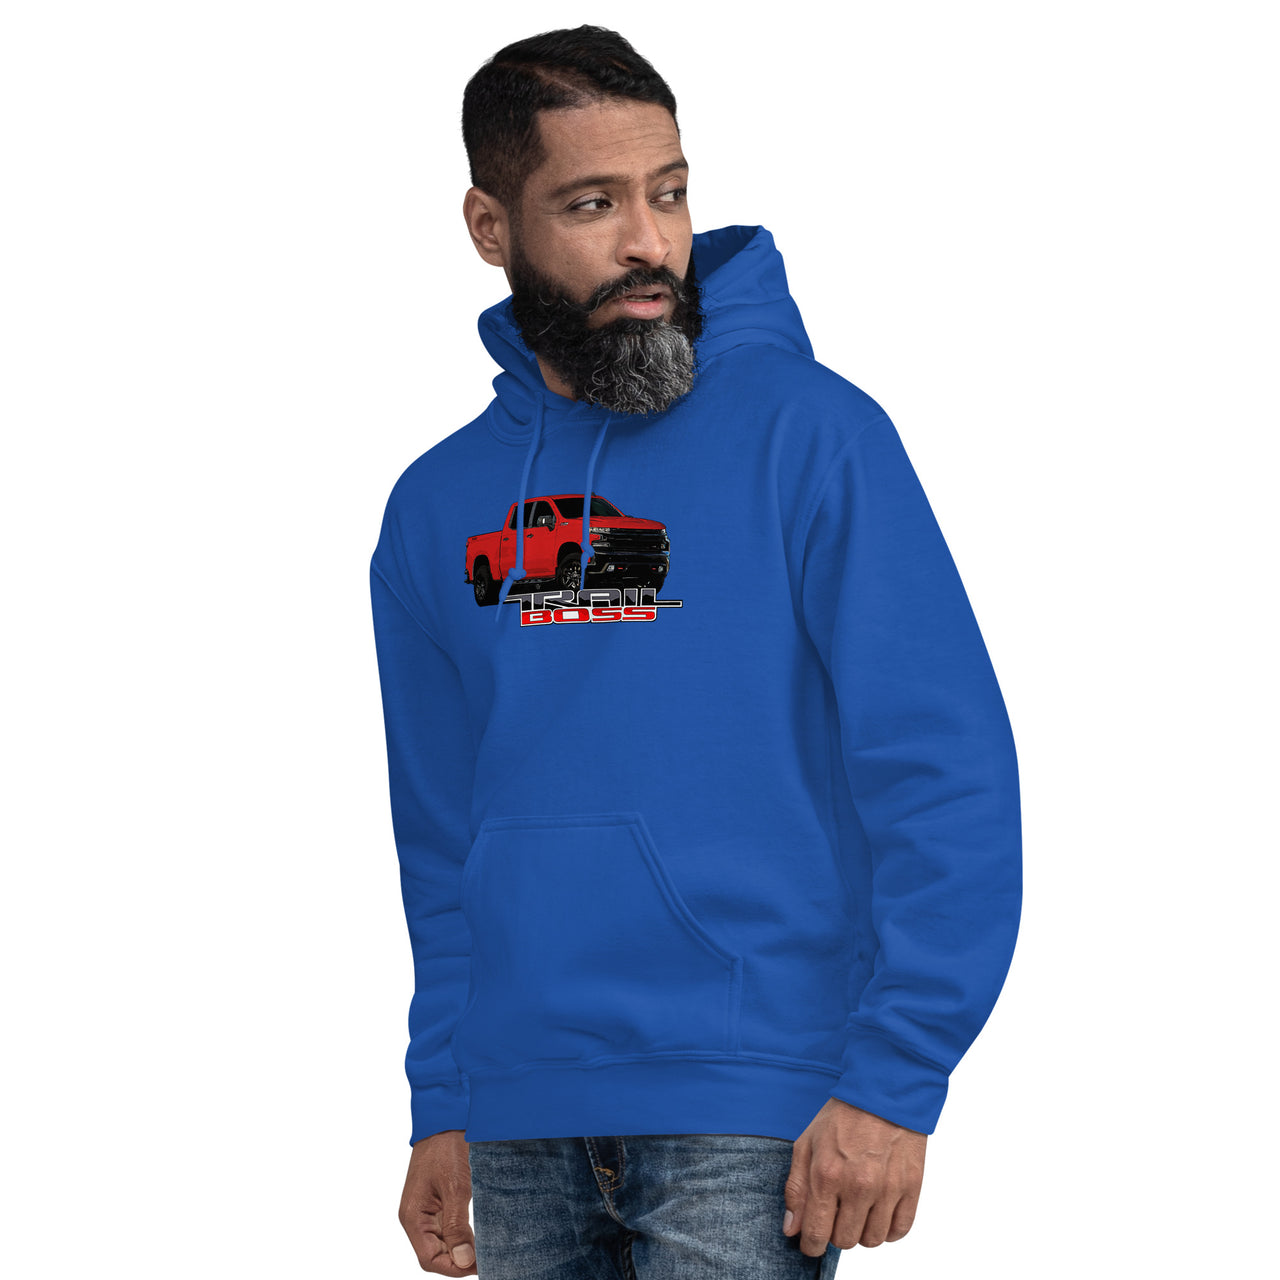 Red Trail Boss Truck Hoodie modeled in royal